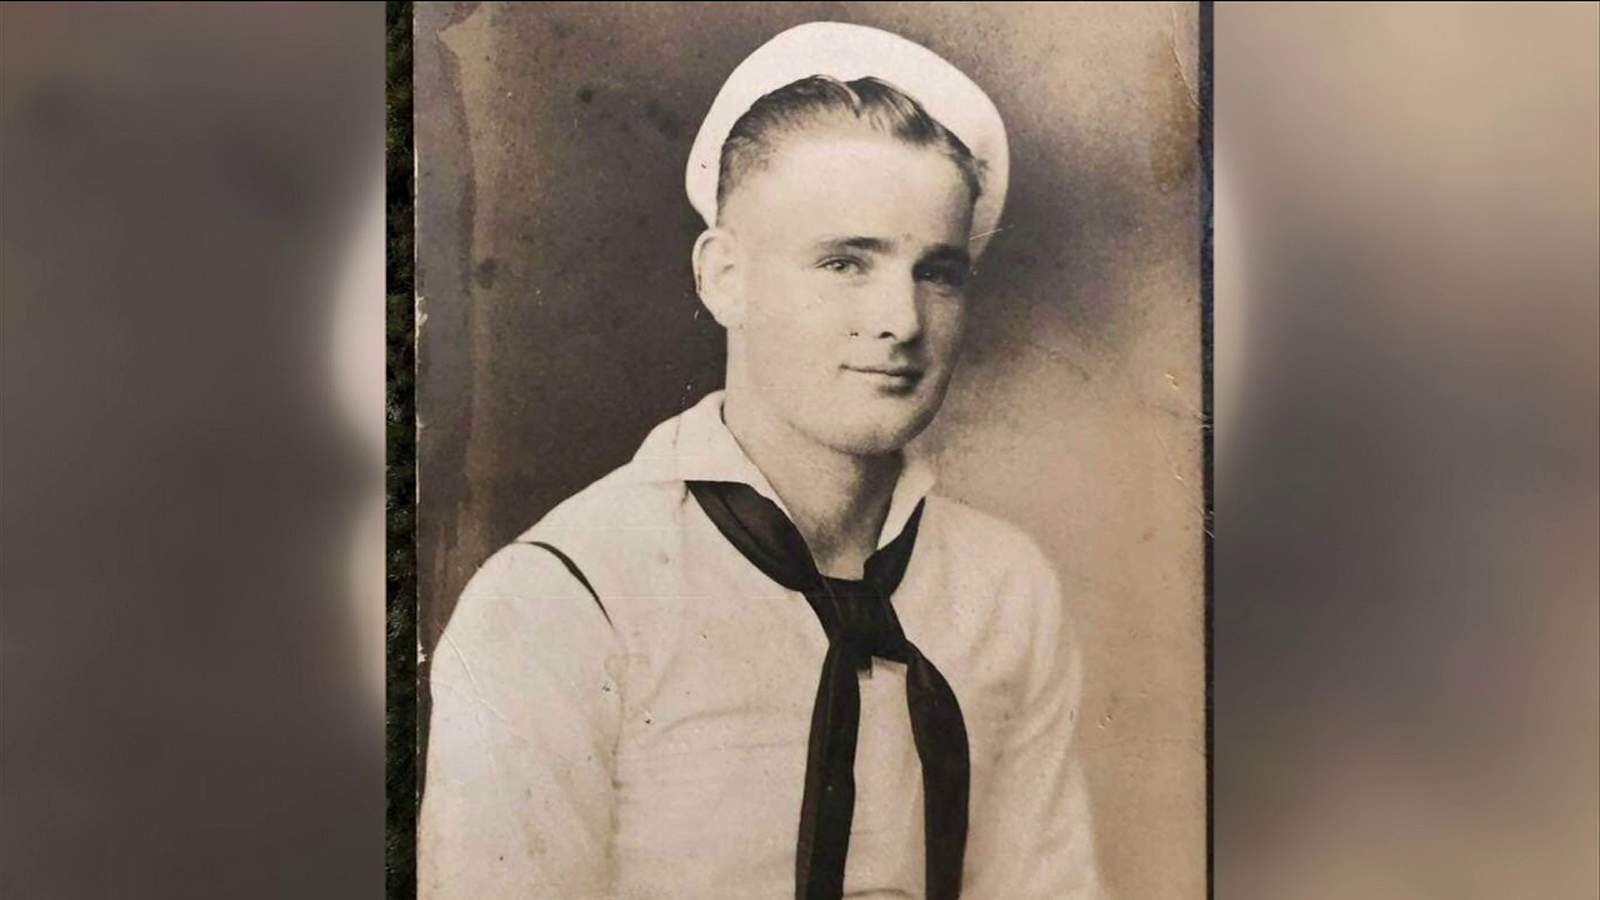 Jacksonville sailor killed in Pearl Harbor attack to be laid to rest 79 years later